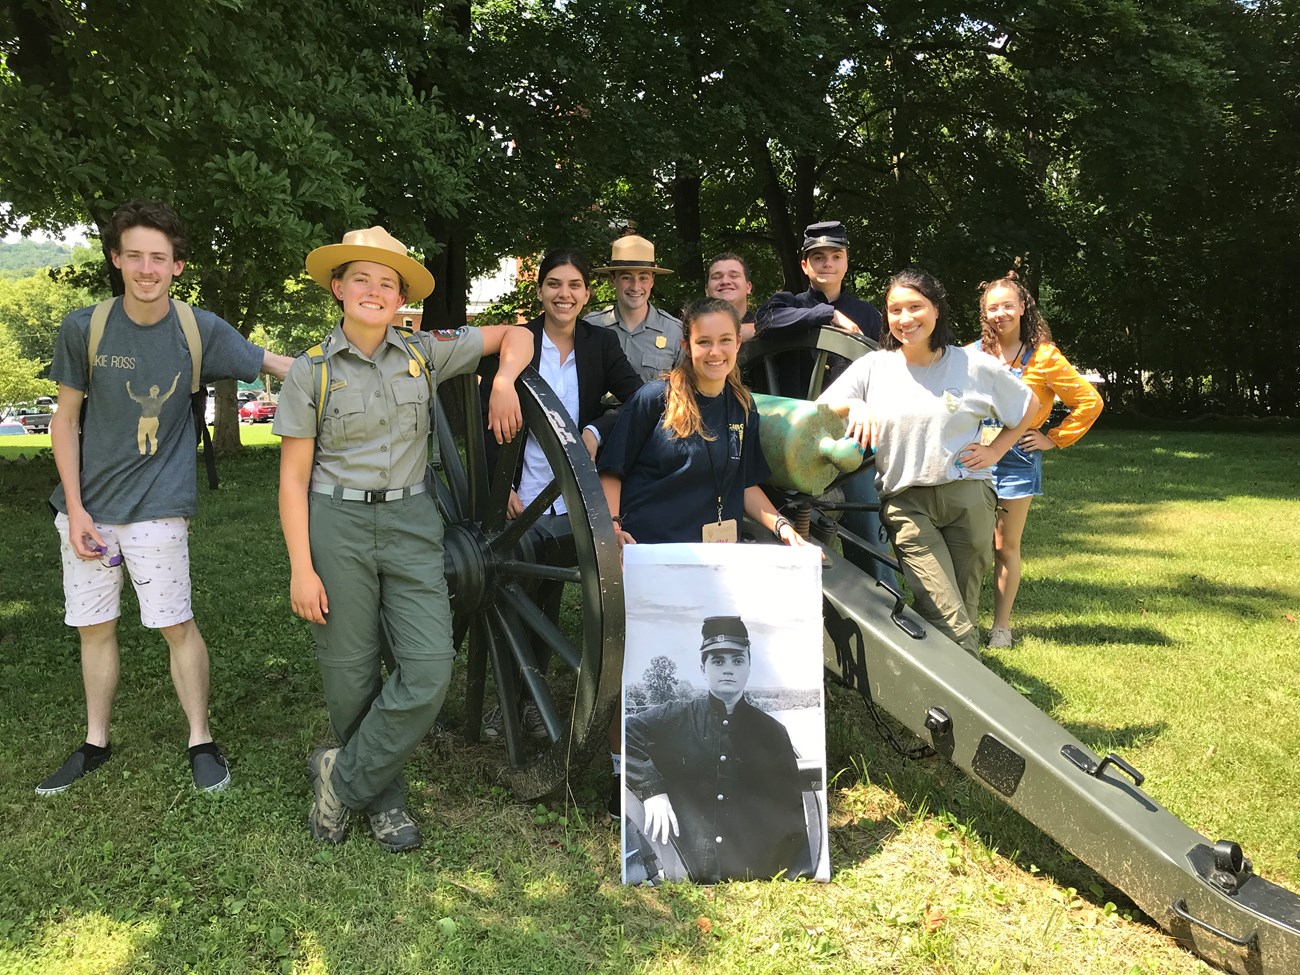 Various youth staff pose for a photo next to an artillery piece in costume after performing a skit.